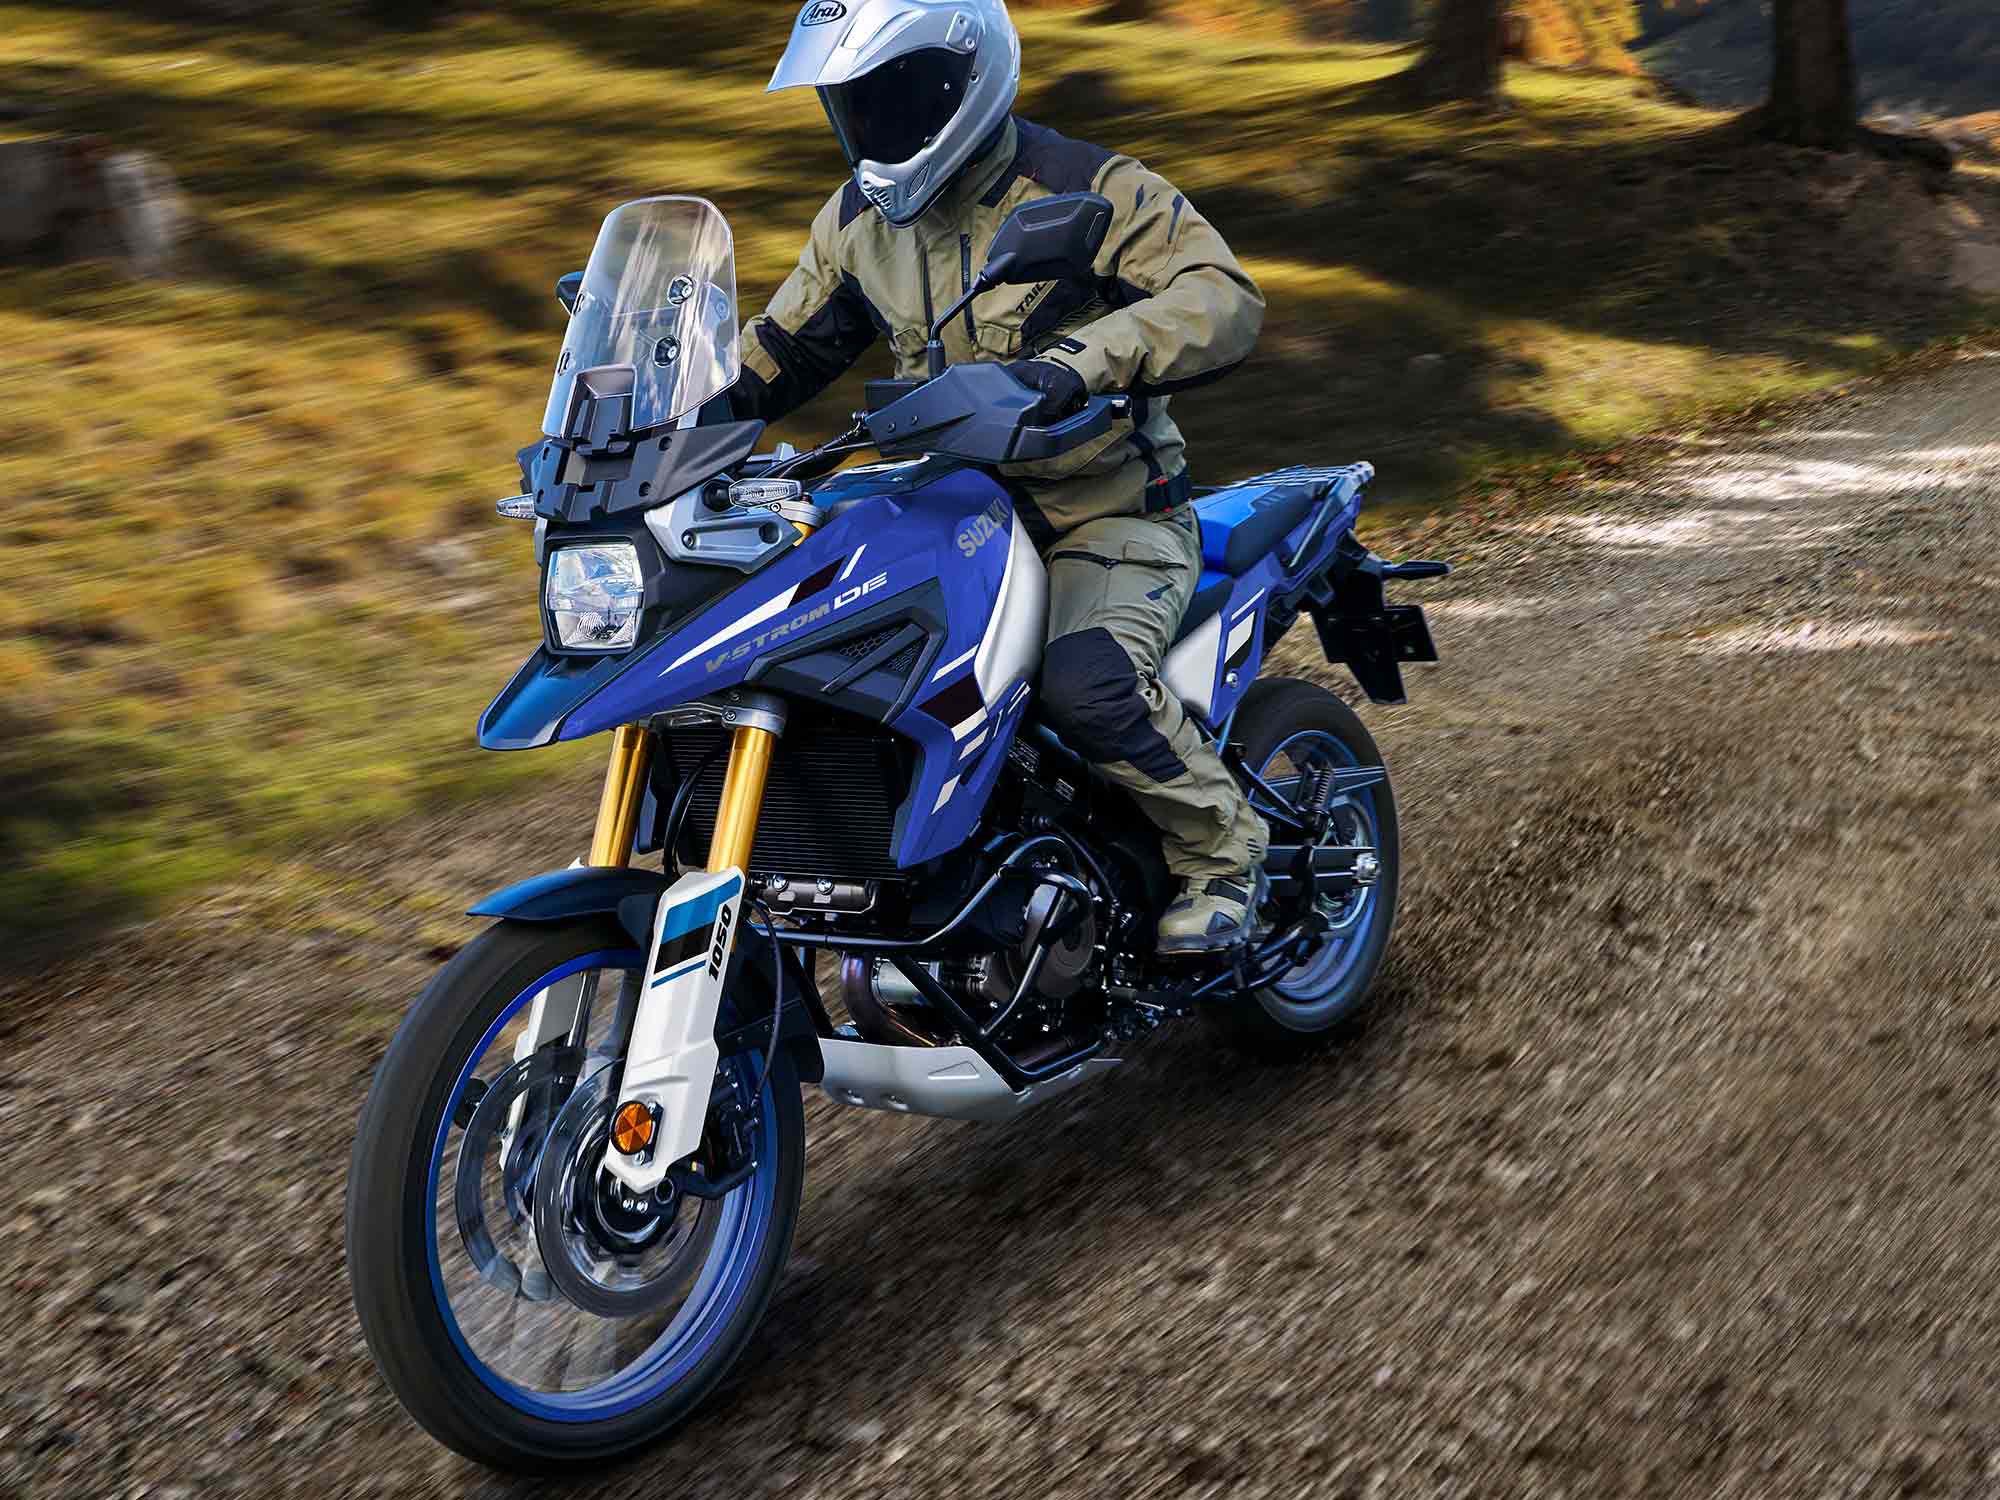 The electronics systems are revised to give riders more off-road control.